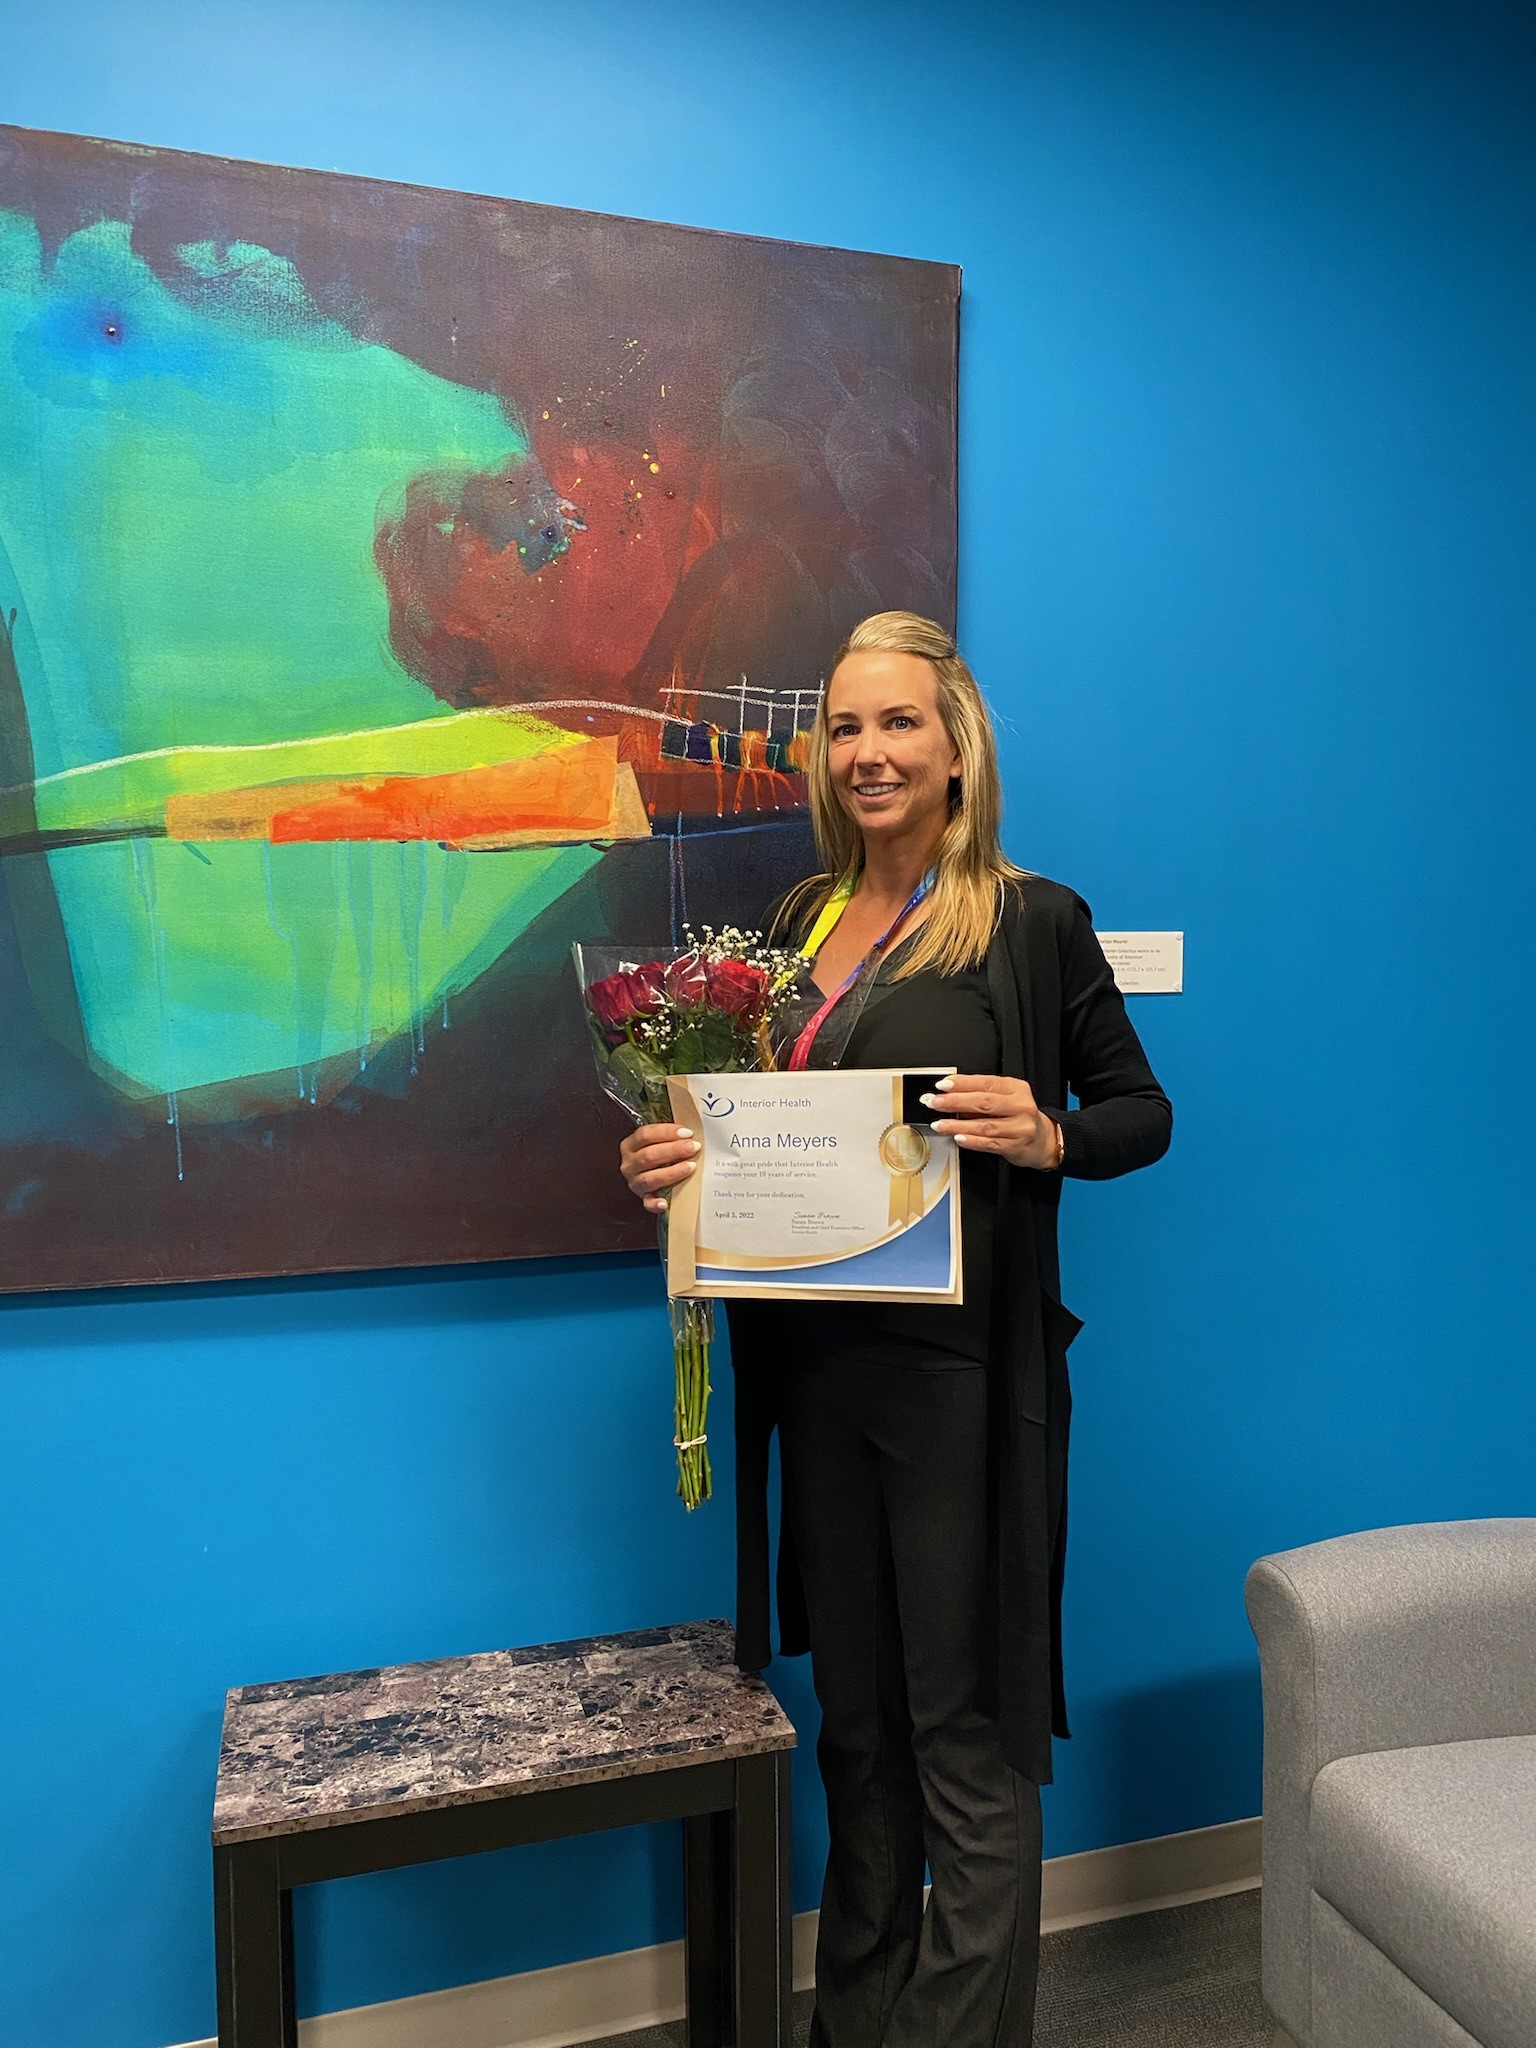 A woman dressed in black standing on front of a blue wall with a piece of art, holding a years of service certificate and a bouquet of roses.